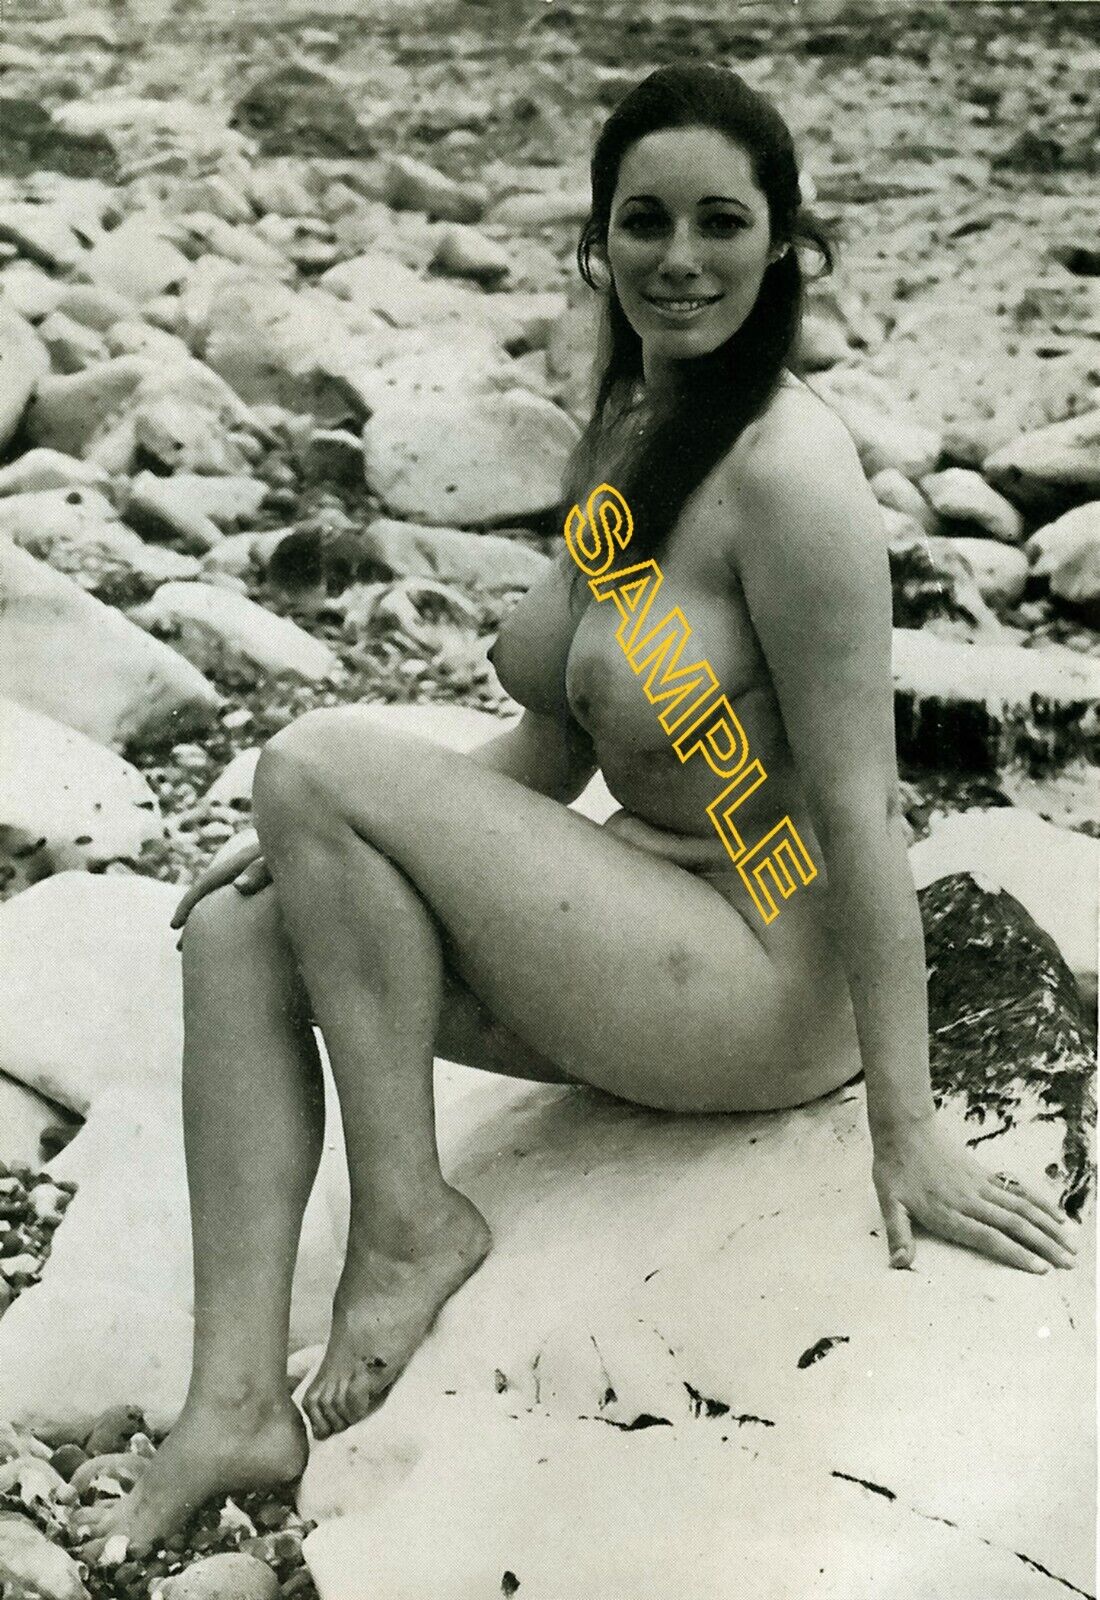 AngelaDuncan NUDE Female Pinup Retro And Classic Model Vintage Photo No 86949